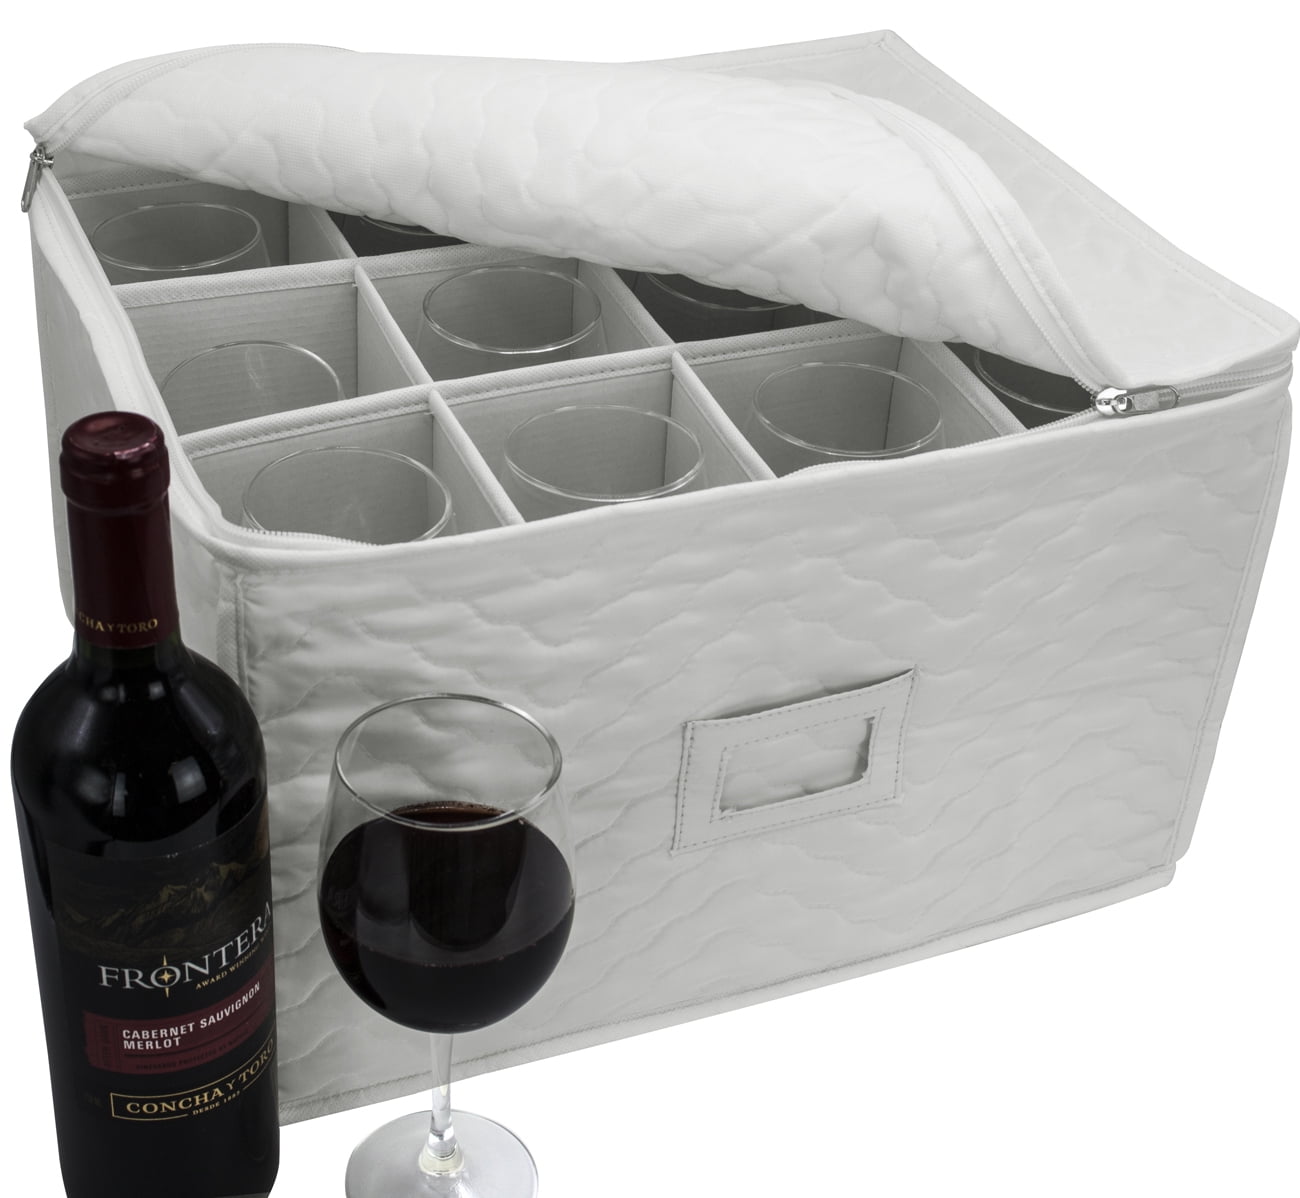  Woffit Wine Glass Storage - Set of 2 Quilted Packing